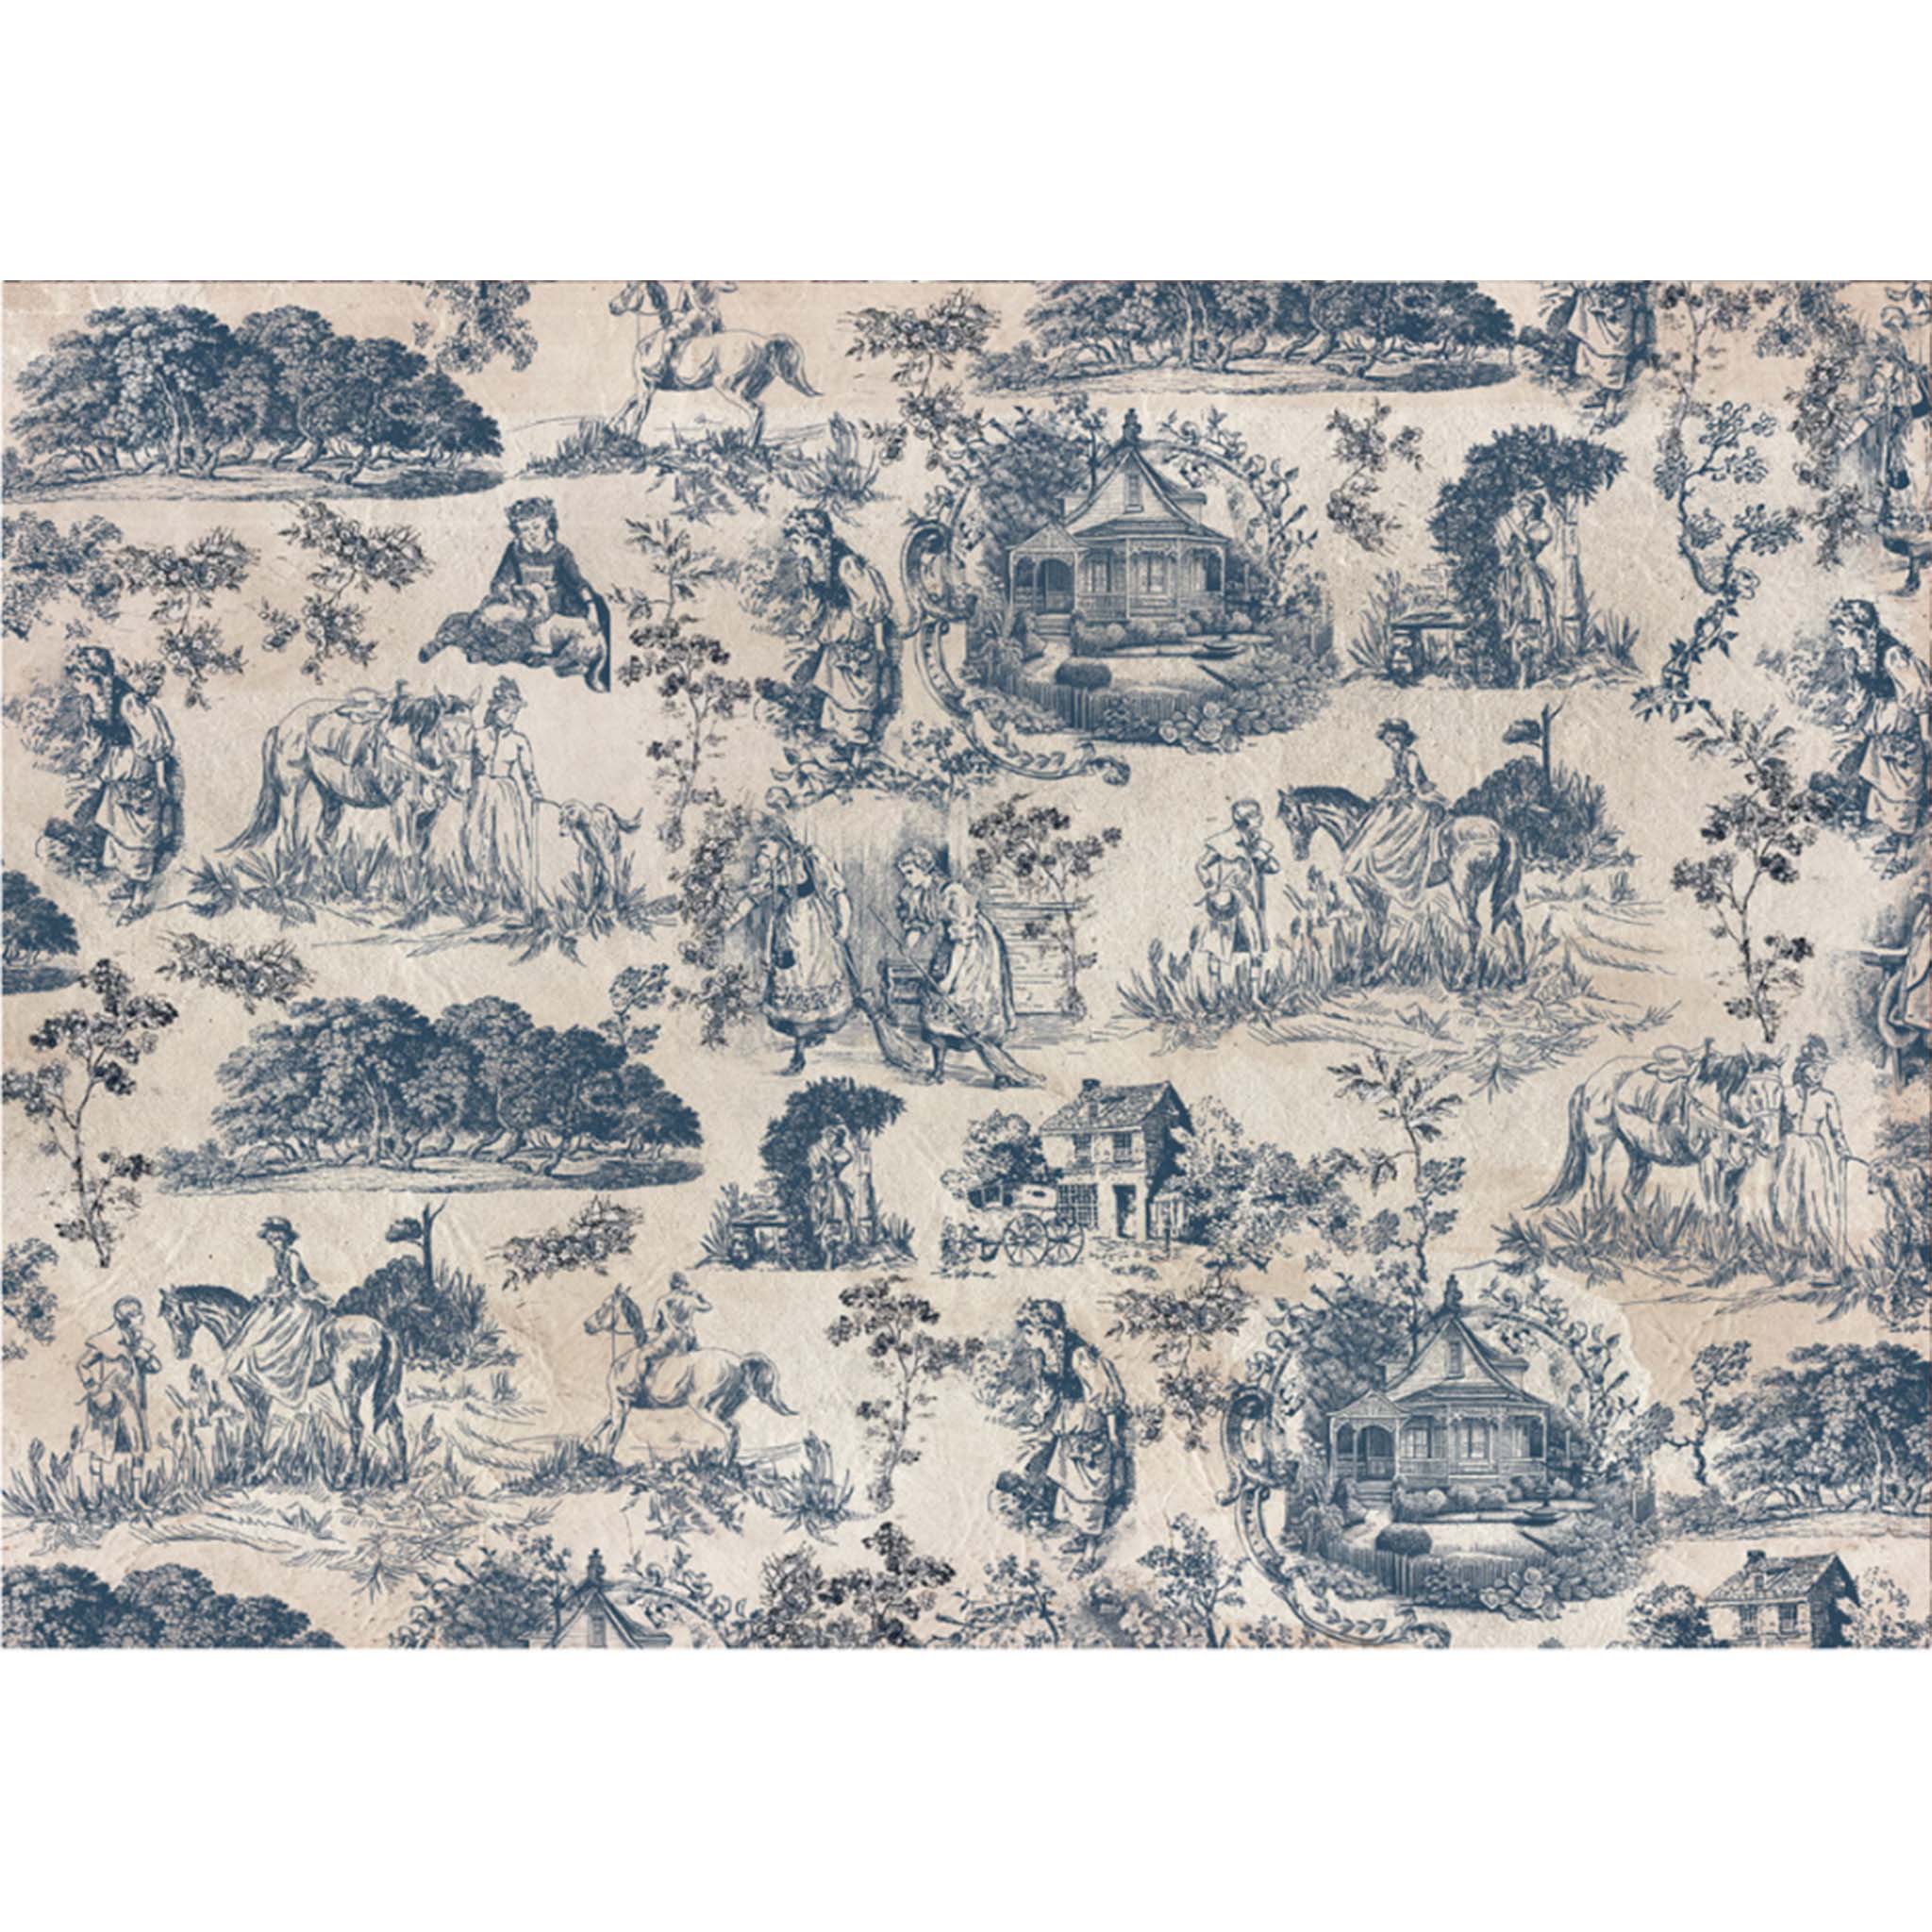 A1 fiber paper that features deep dusty blue toile print featuring people and horses in the countryside. White borders are on the top and bottom.